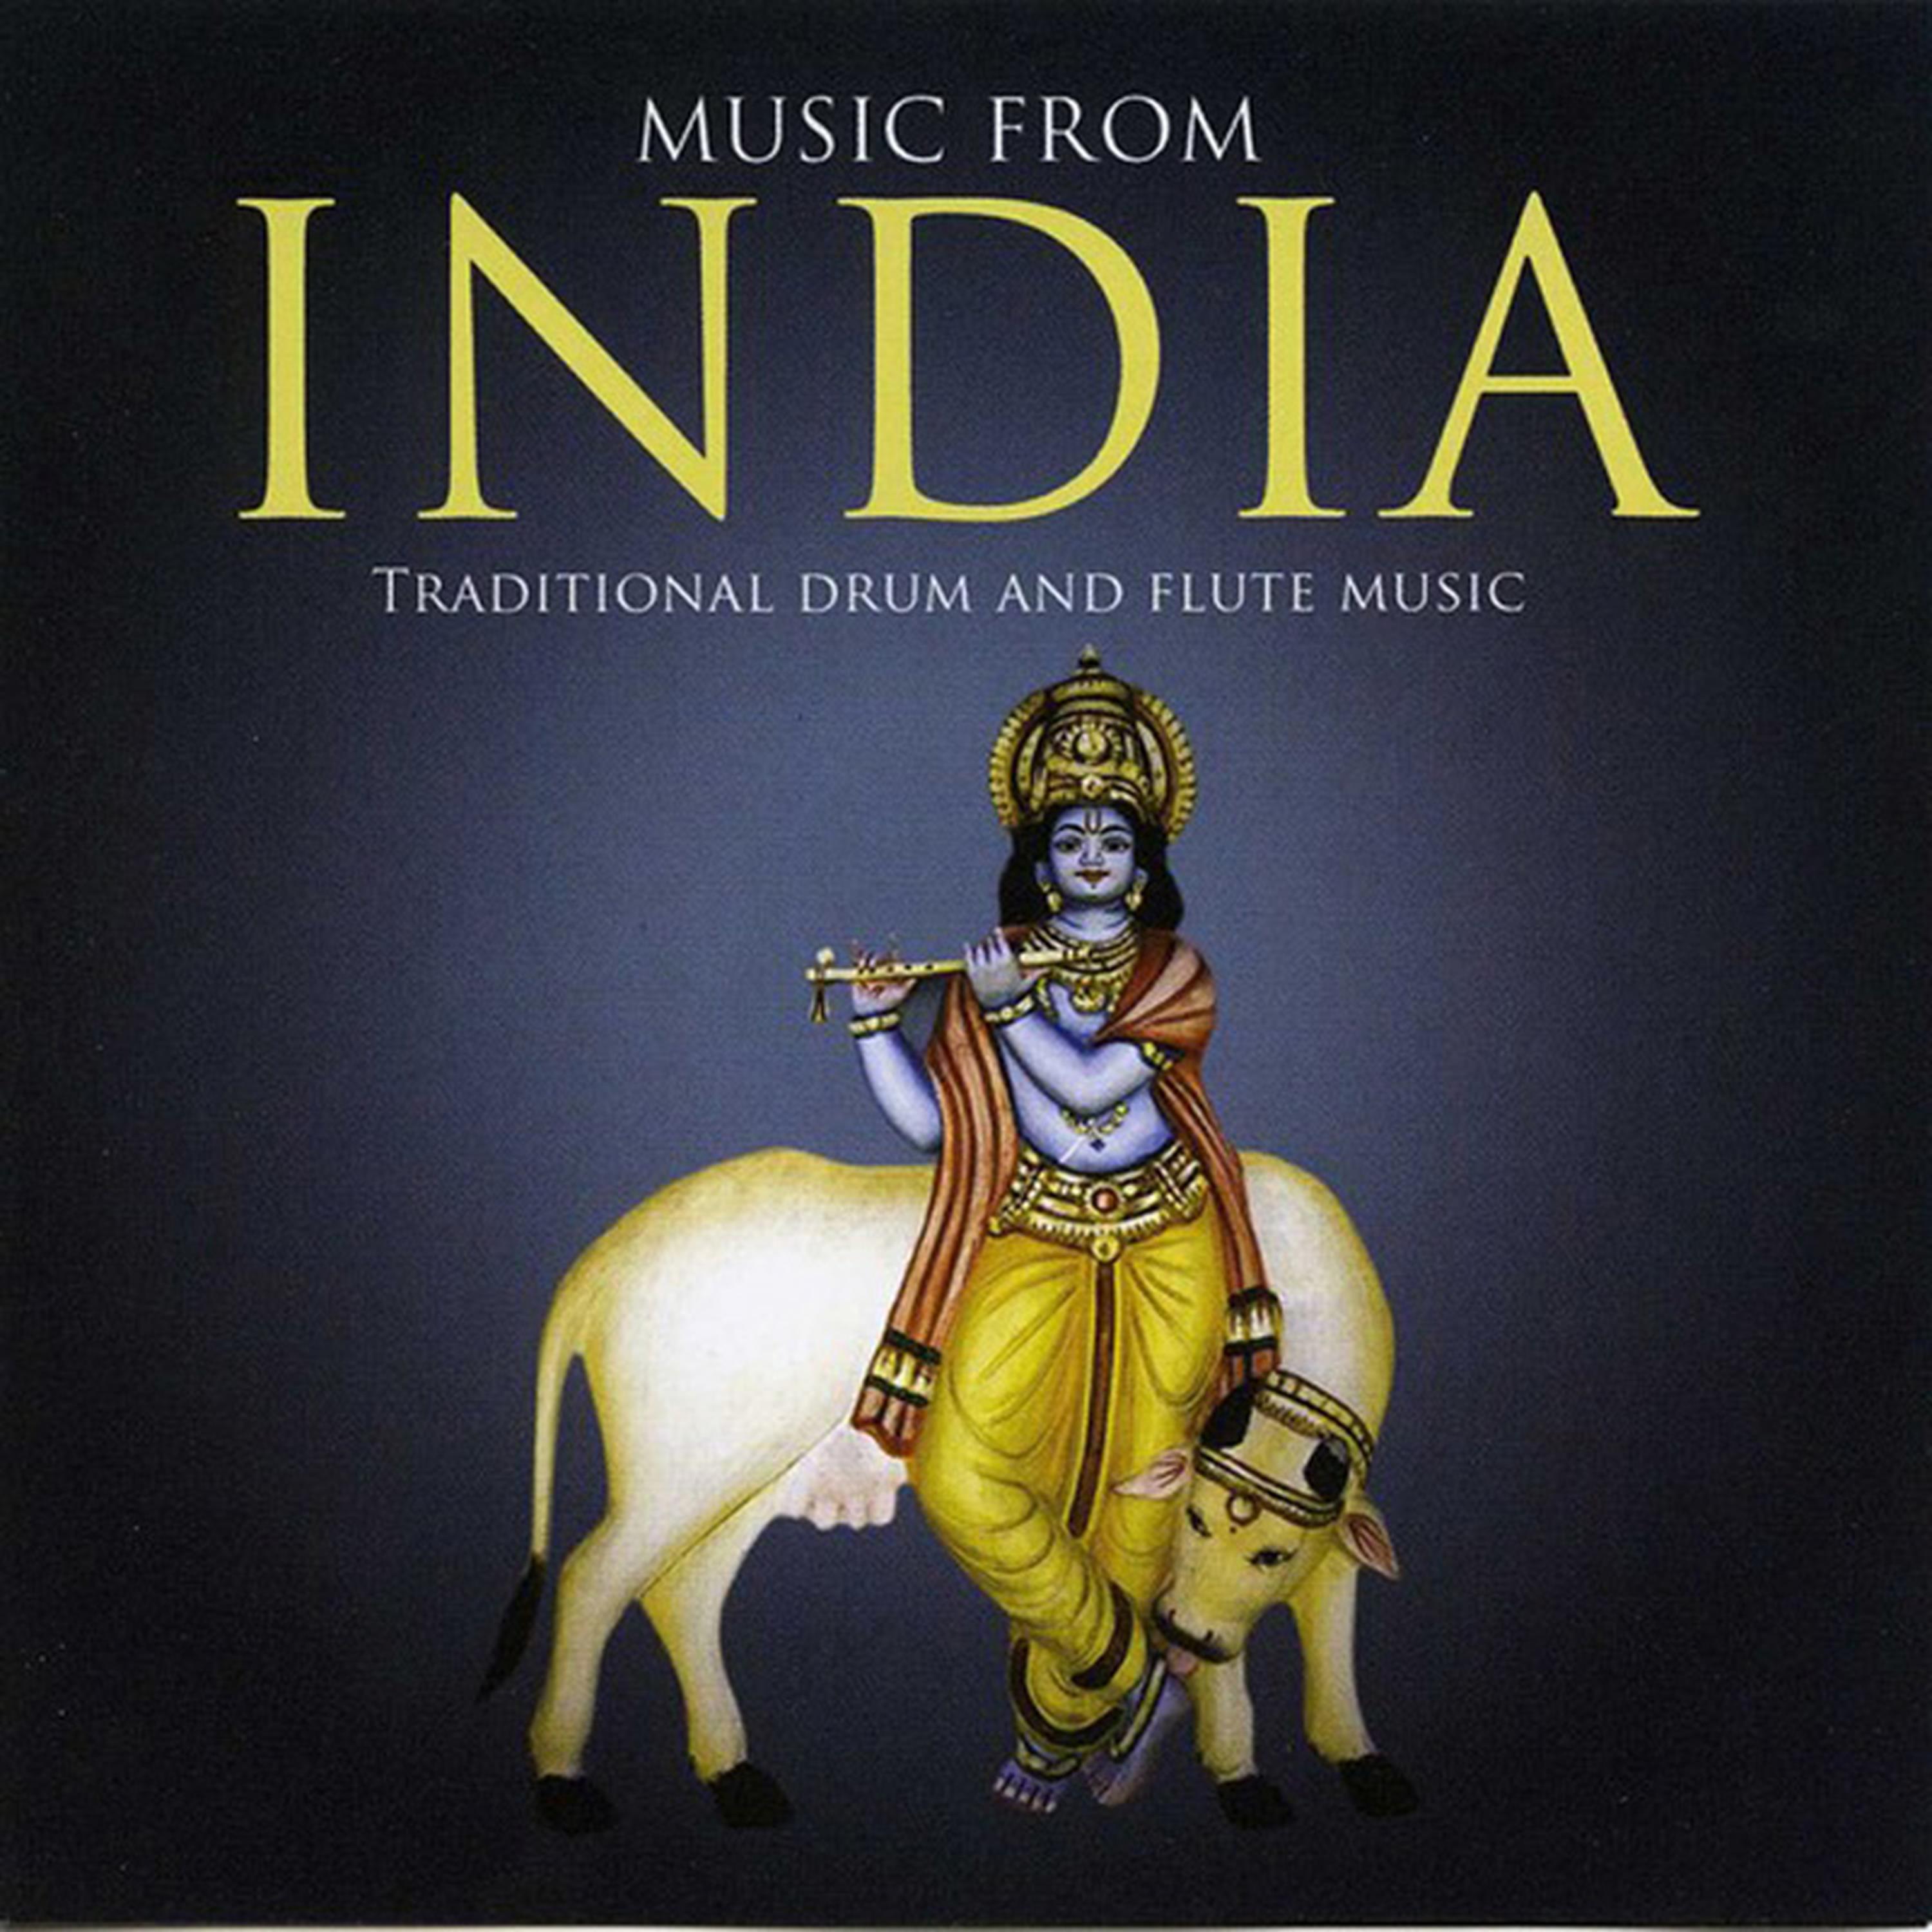 The Music Of India